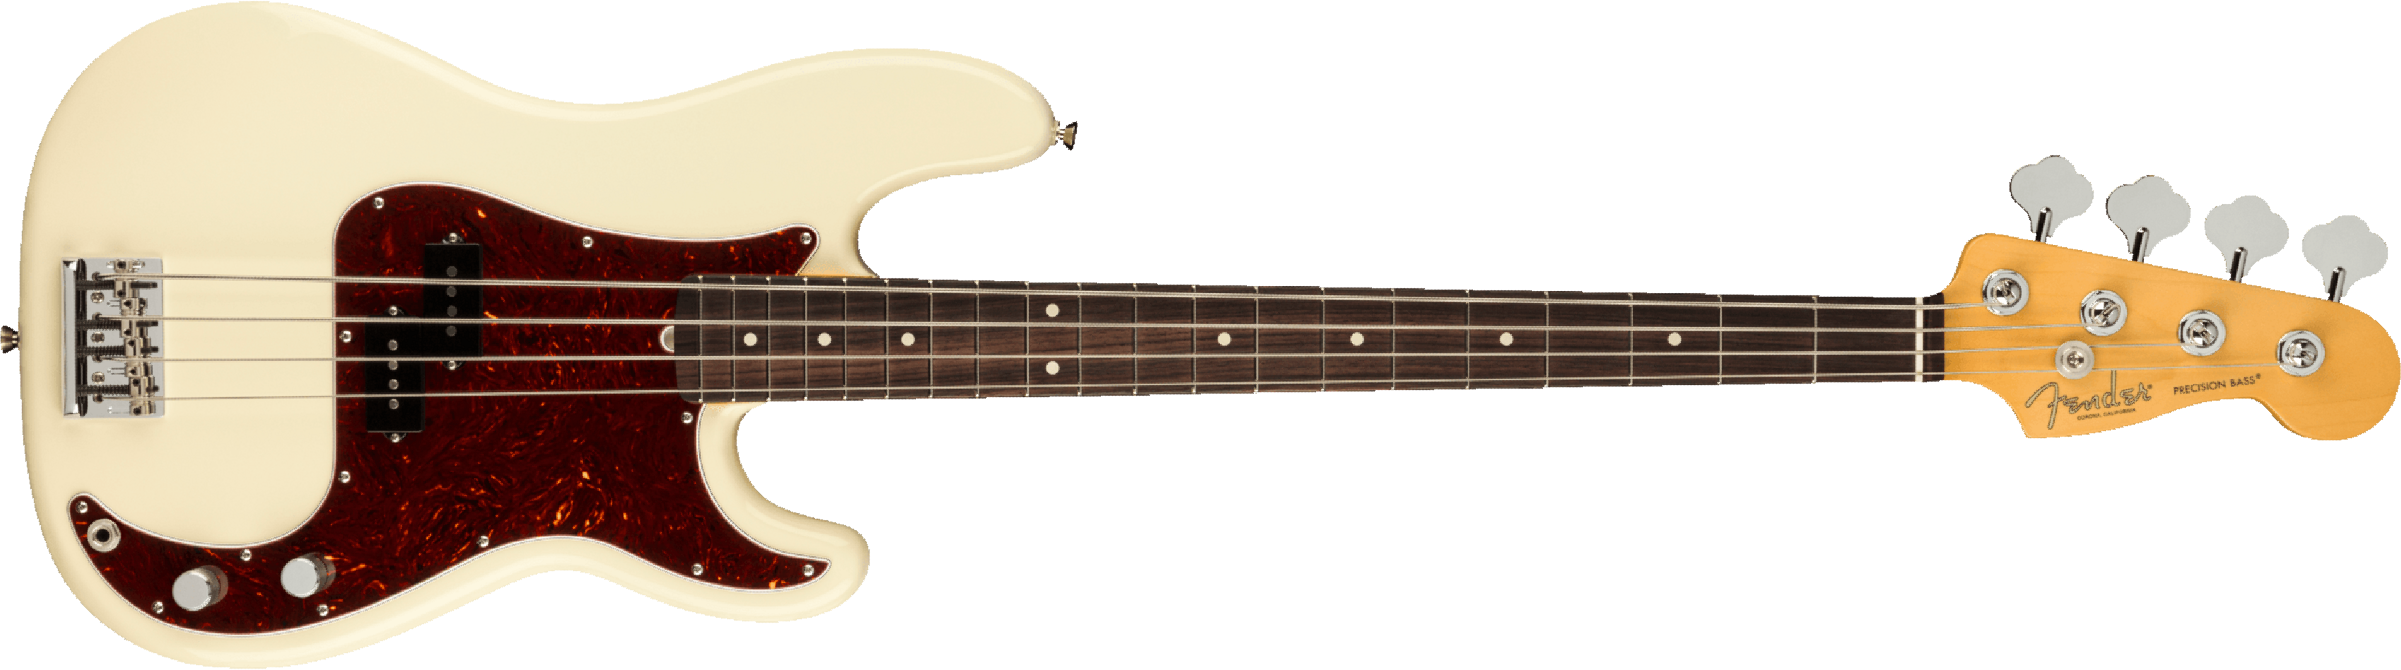 Fender Precision Bass American Professional Ii Usa Rw - Olympic White - Solid body electric bass - Main picture